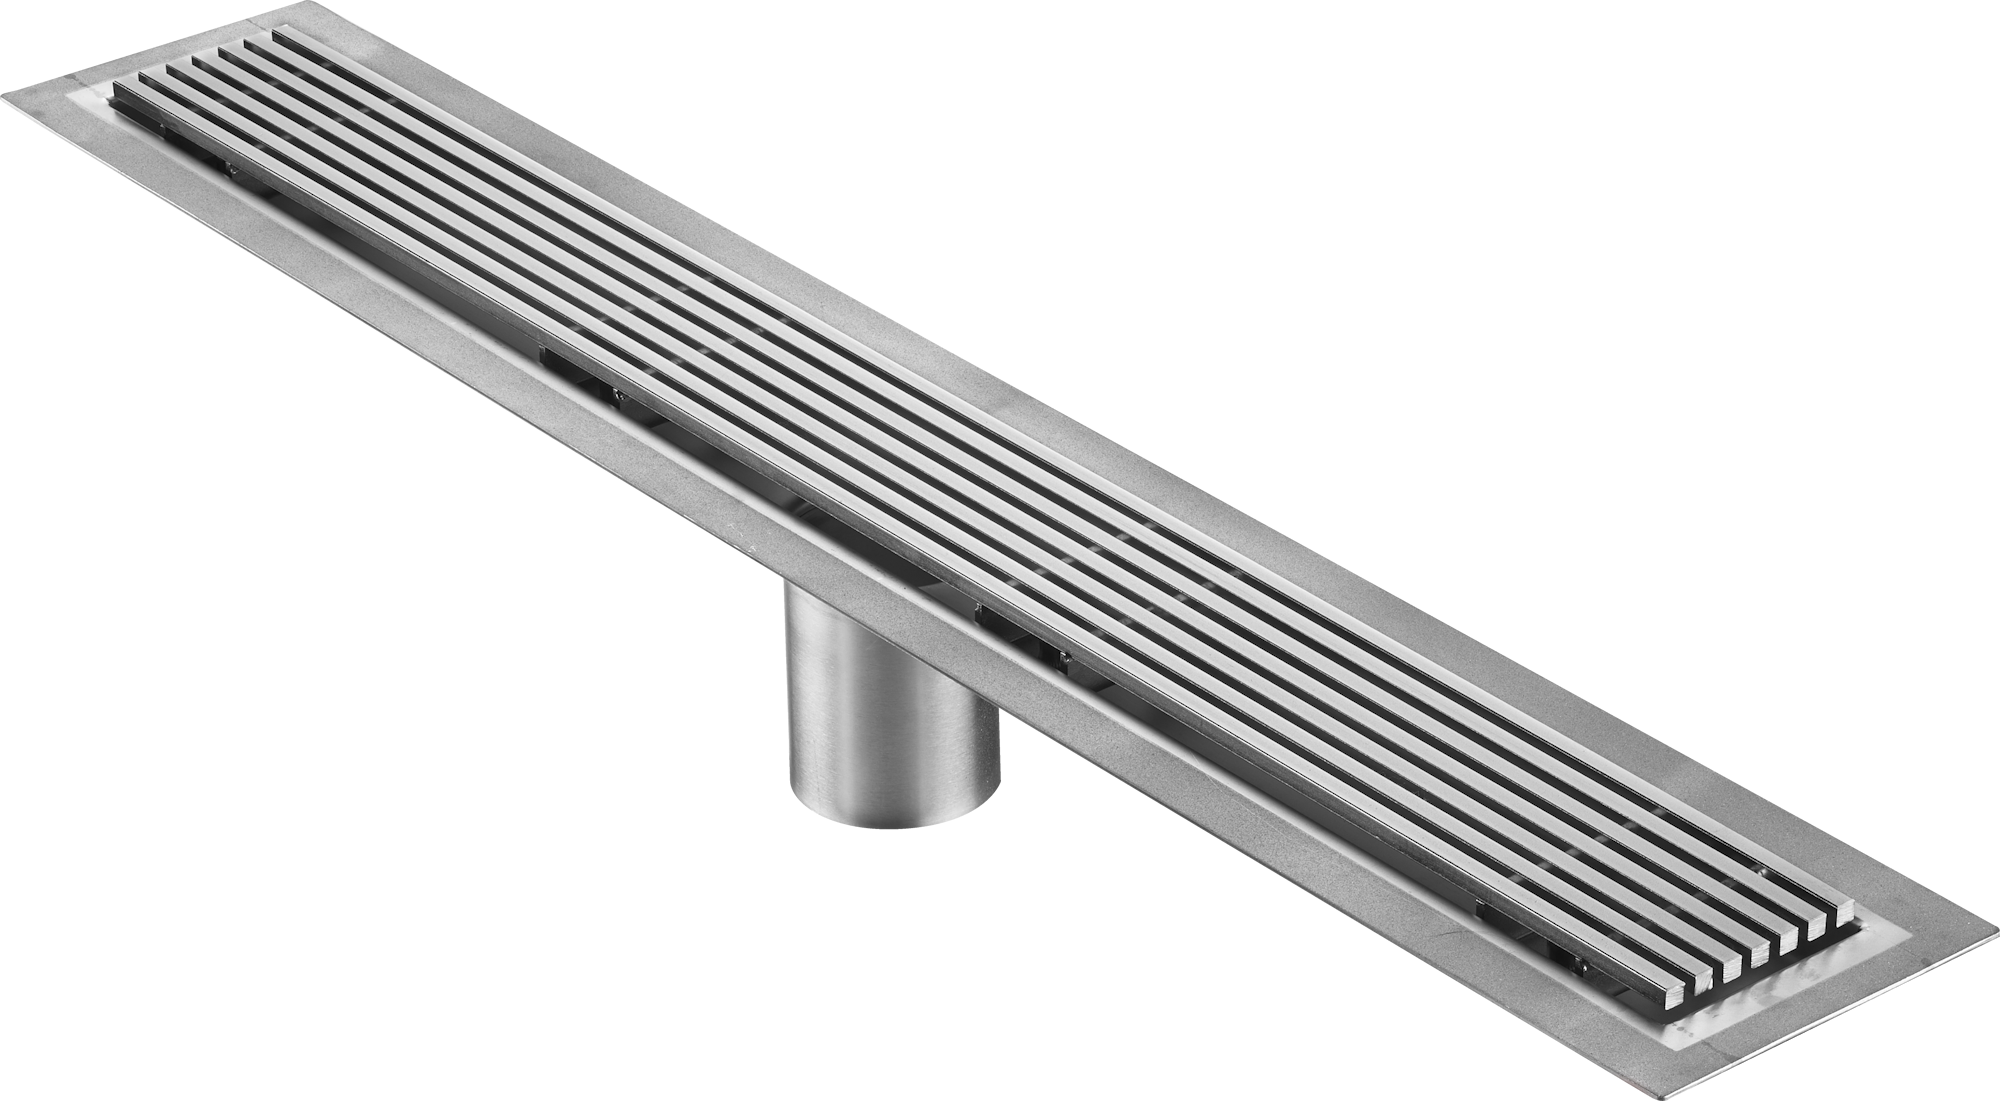 39 Inch Wedge Wire Grate Linear Drain Brushed Stainless Steel, Drains Unlimited